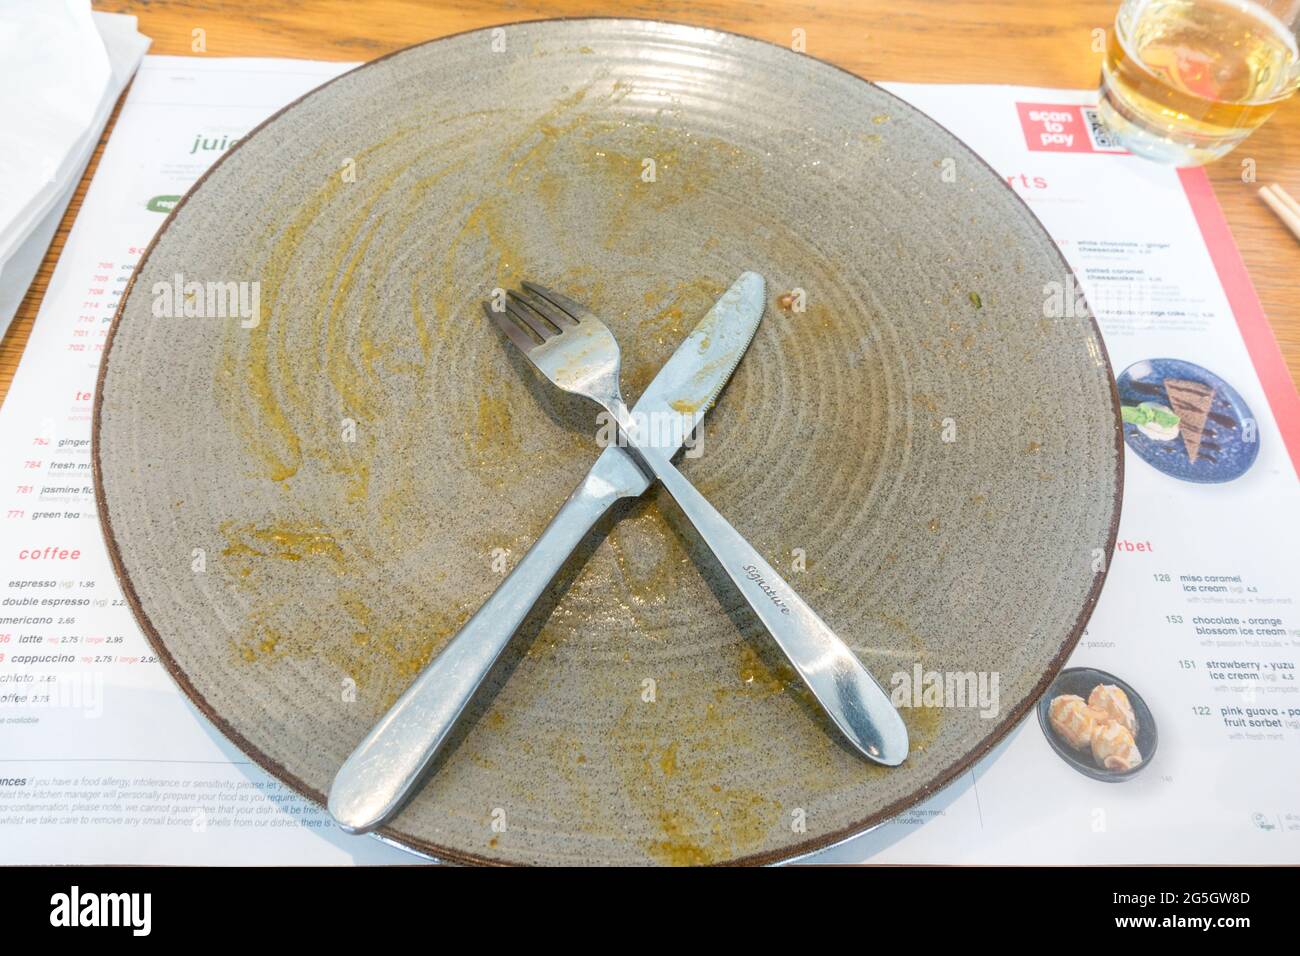 Finished meal empty plate with fork and knife Stock Photo